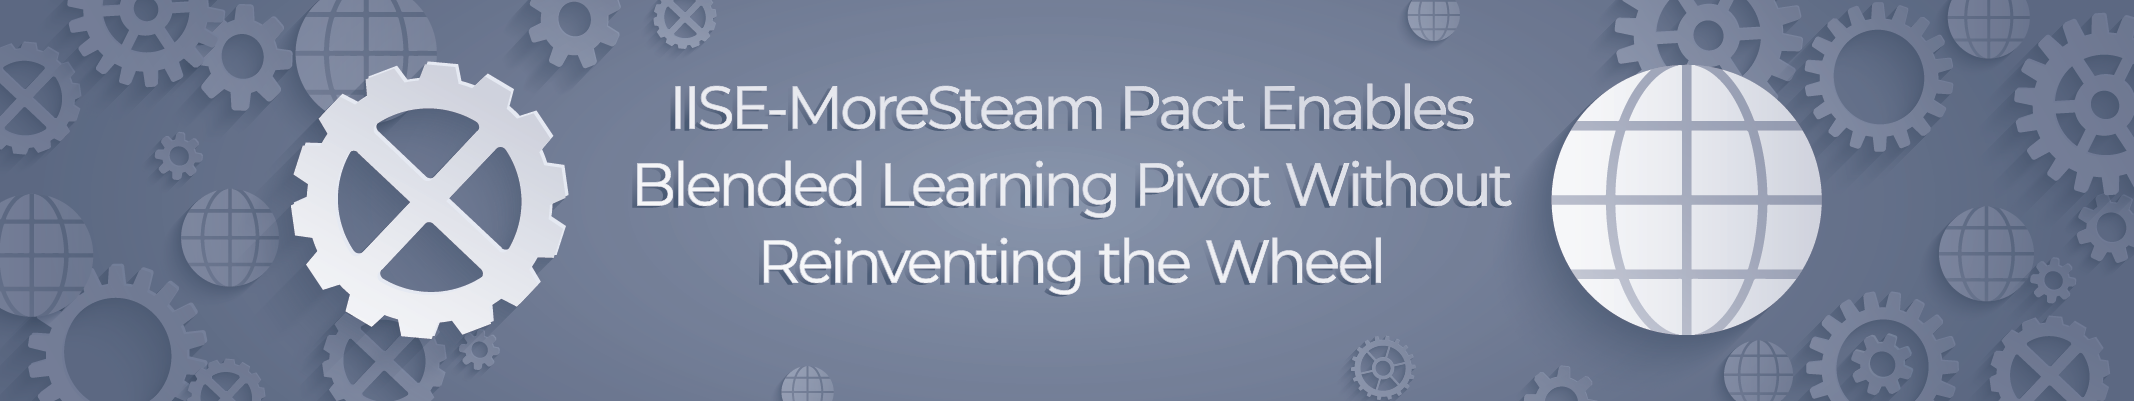 IISE-MoreSteam Pact Enables Blended Learning Pivot Without Reinventing the Wheel